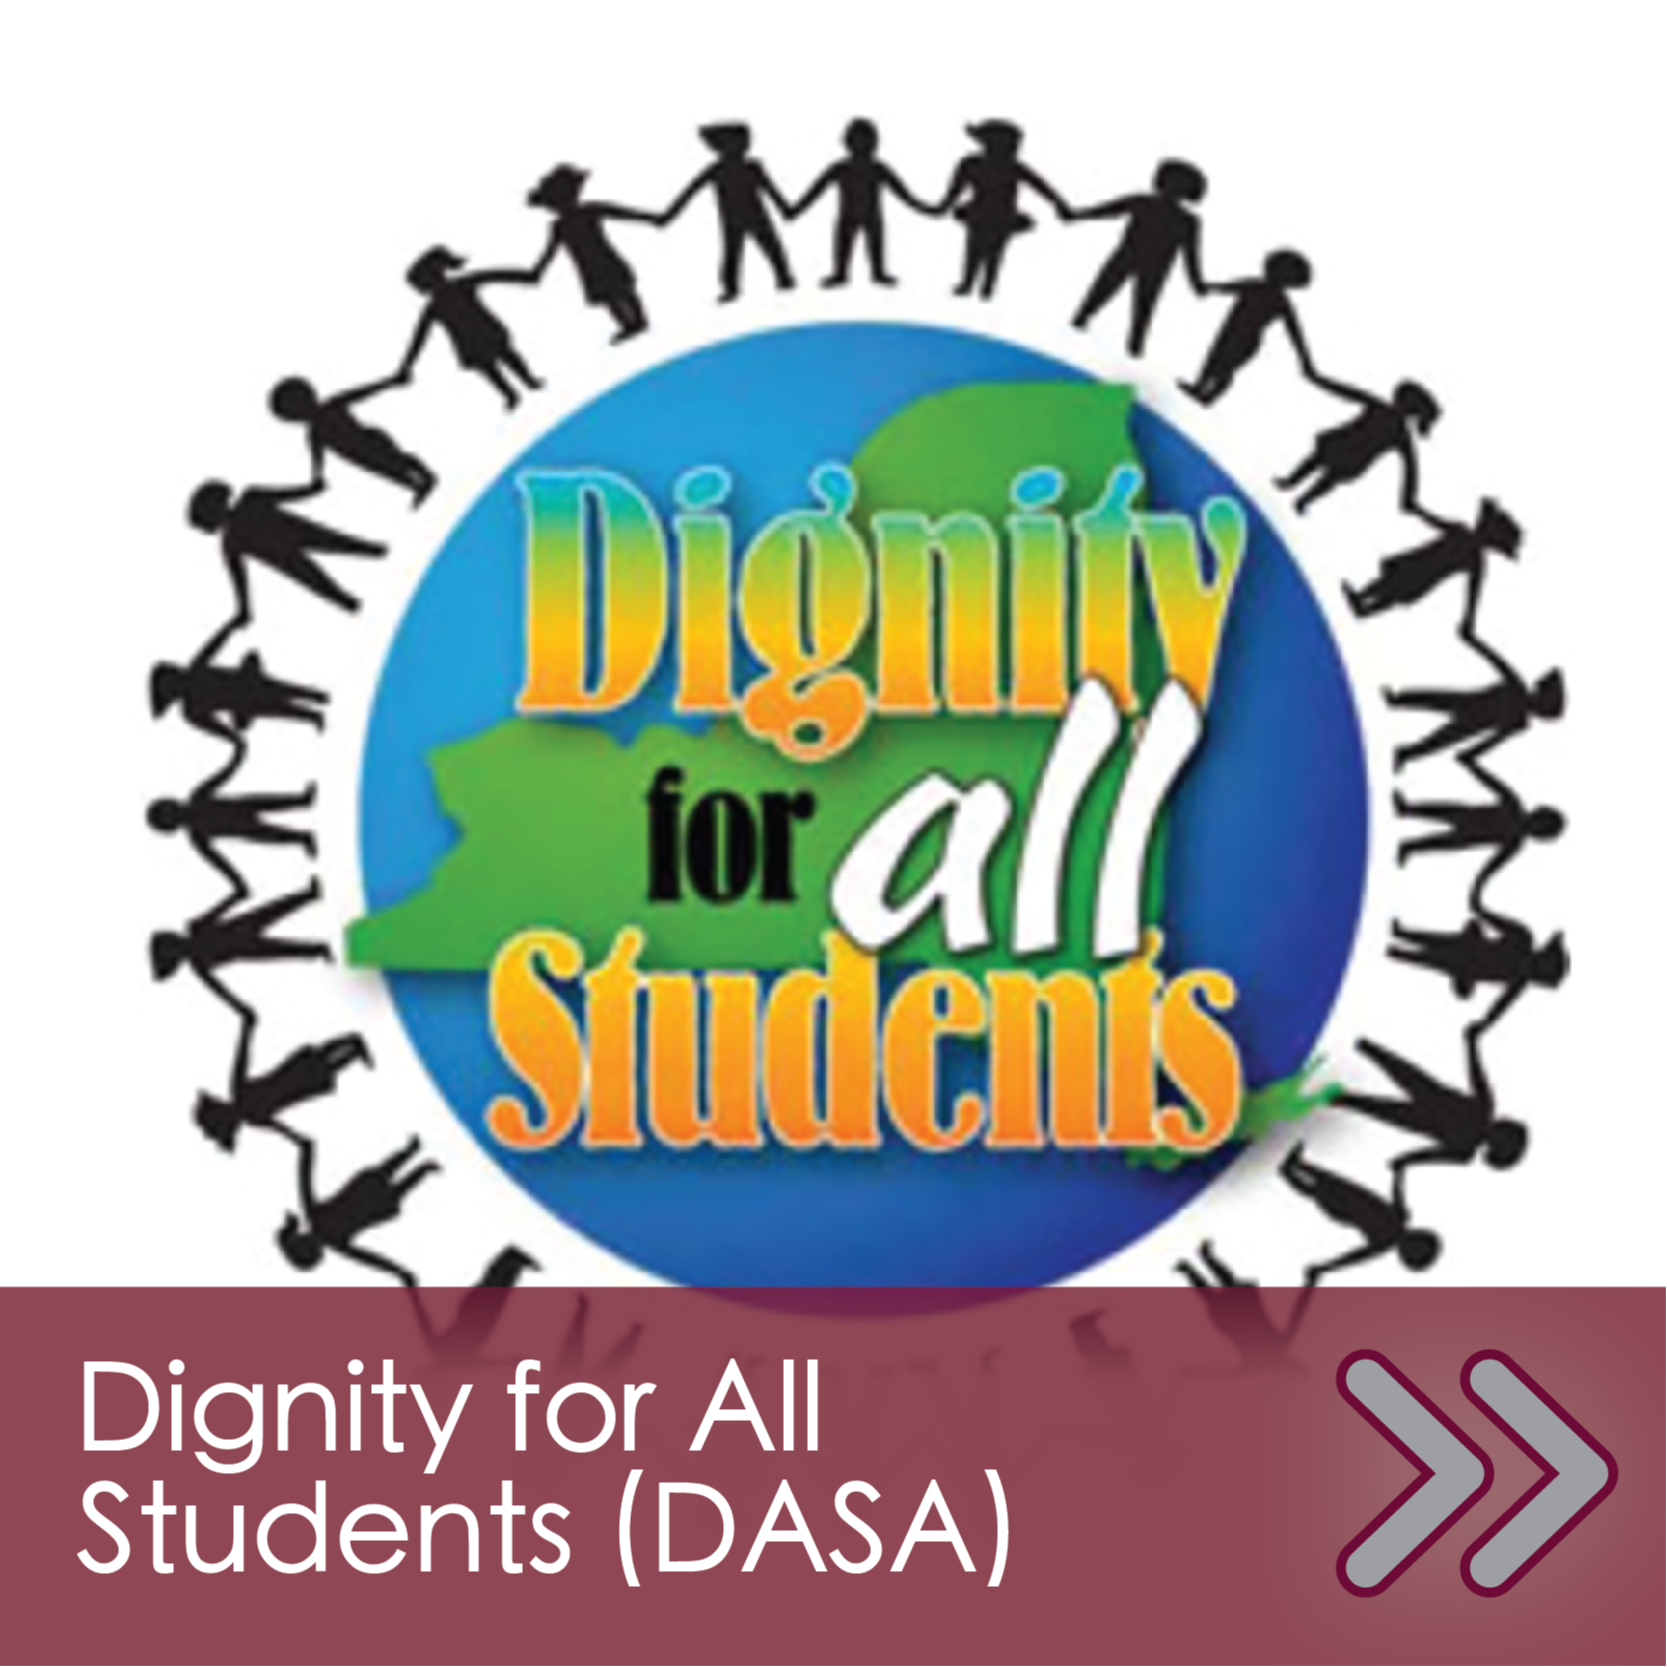 DCMO BOCES Dignity for All Students Navigation Link